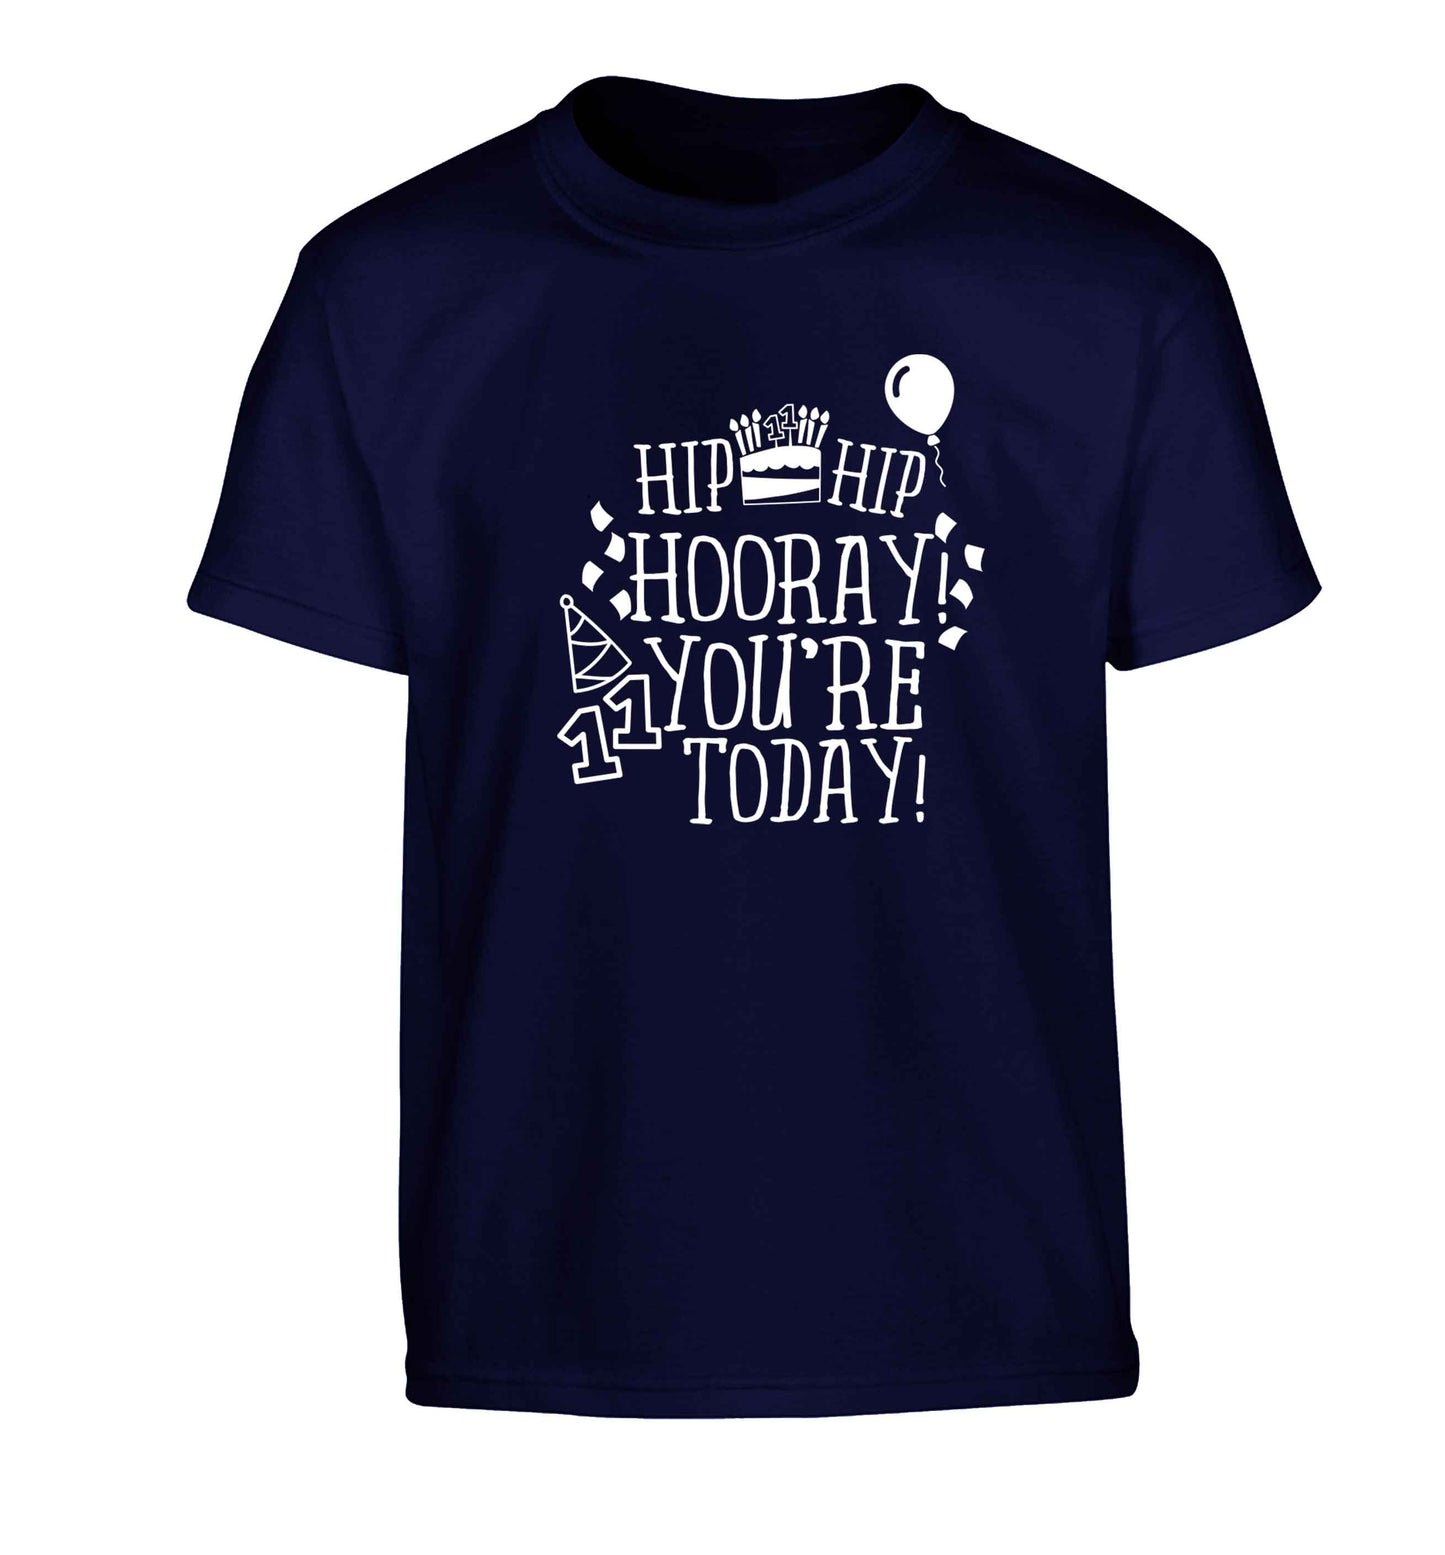 Hip hip hooray I you're eleven today! Children's navy Tshirt 12-13 Years